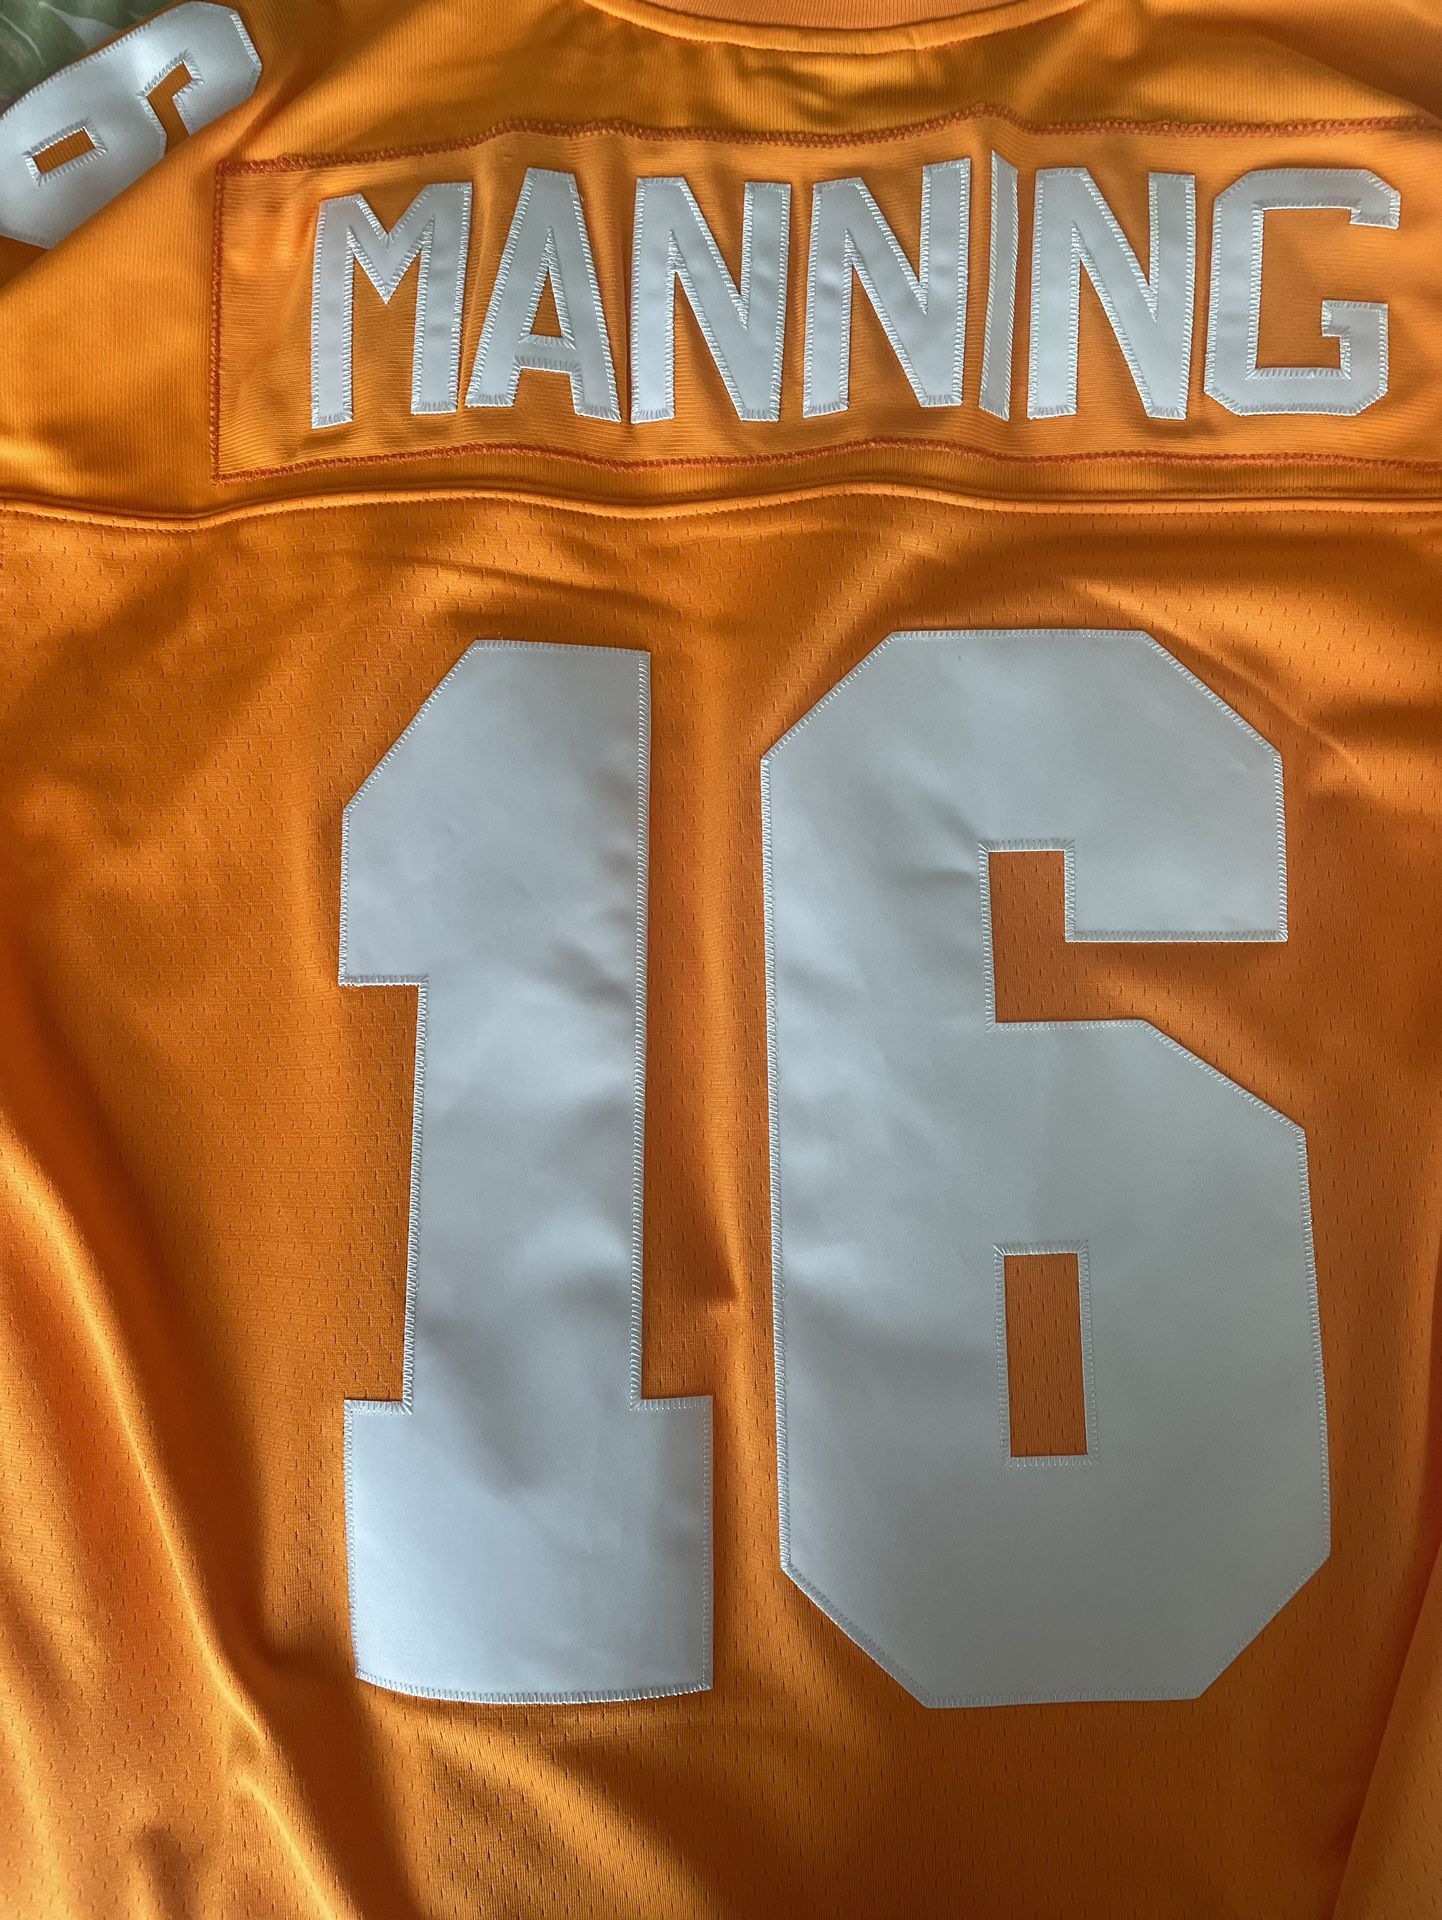 Peyton Manning Tennessee Jersey, Stitched numbers, XL, NWT